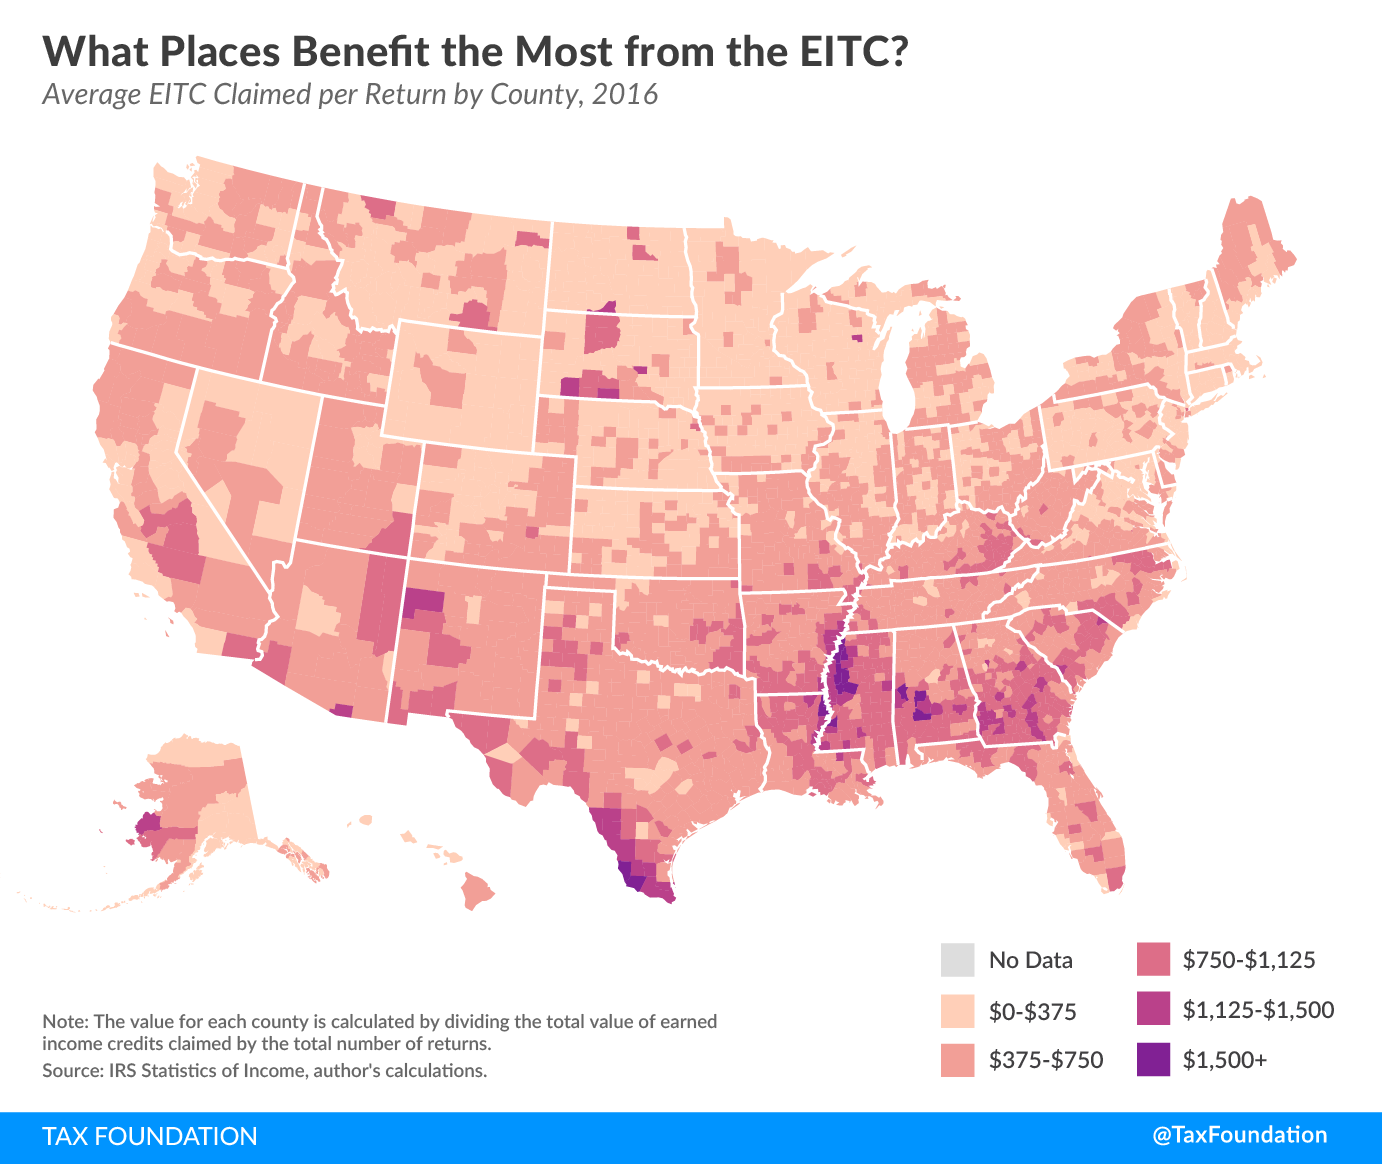 who benefits the most from the EITC, earned income tax credit., low income workers